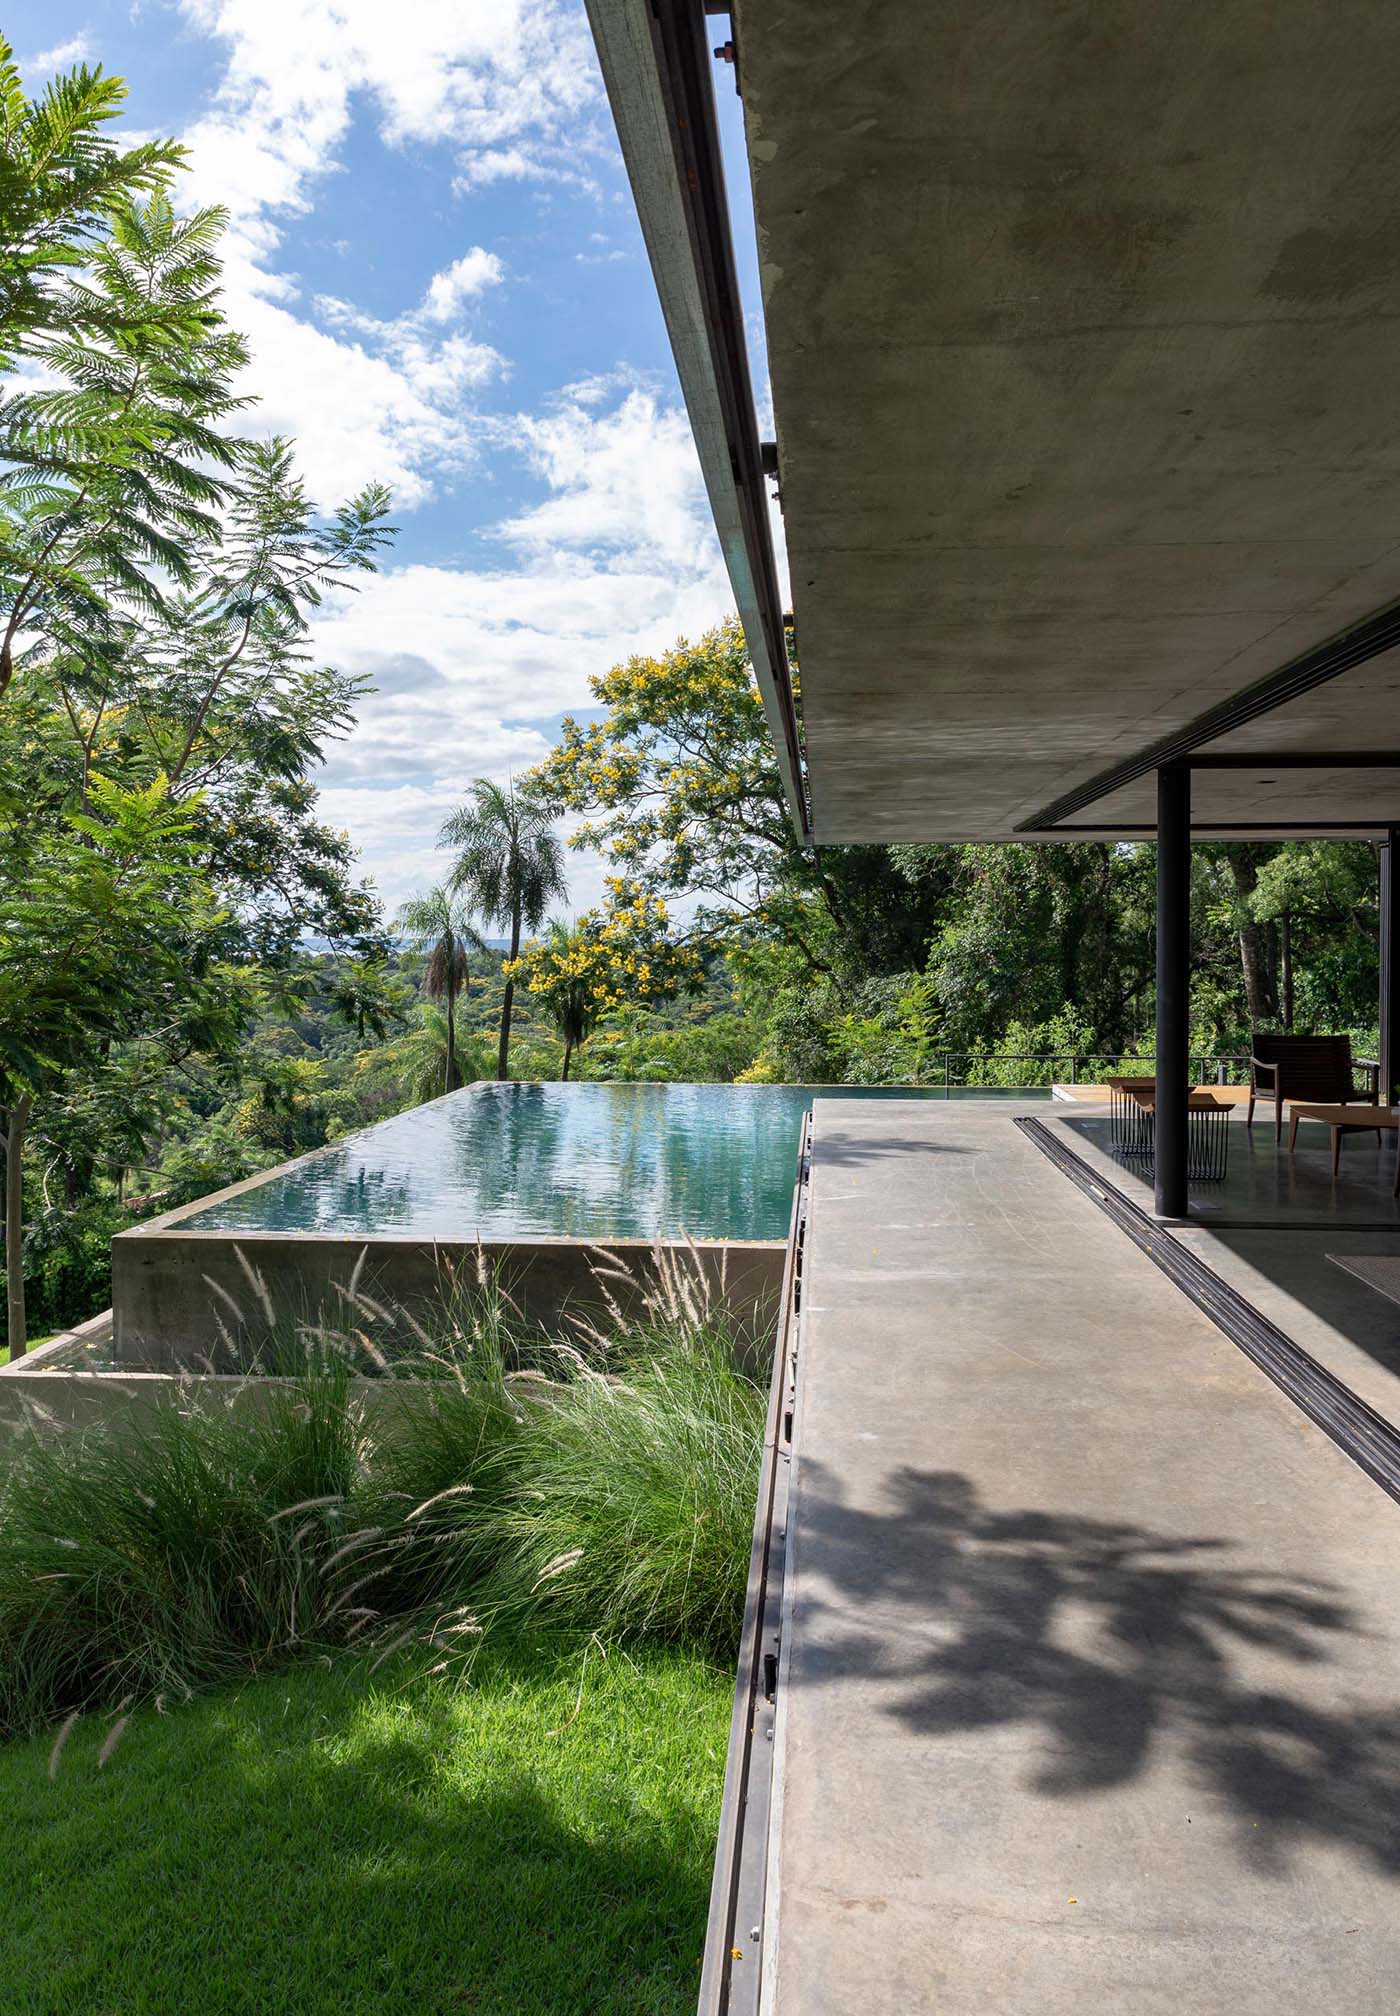 A modern house that has an infinity edge swimming pool that wraps around the corner.